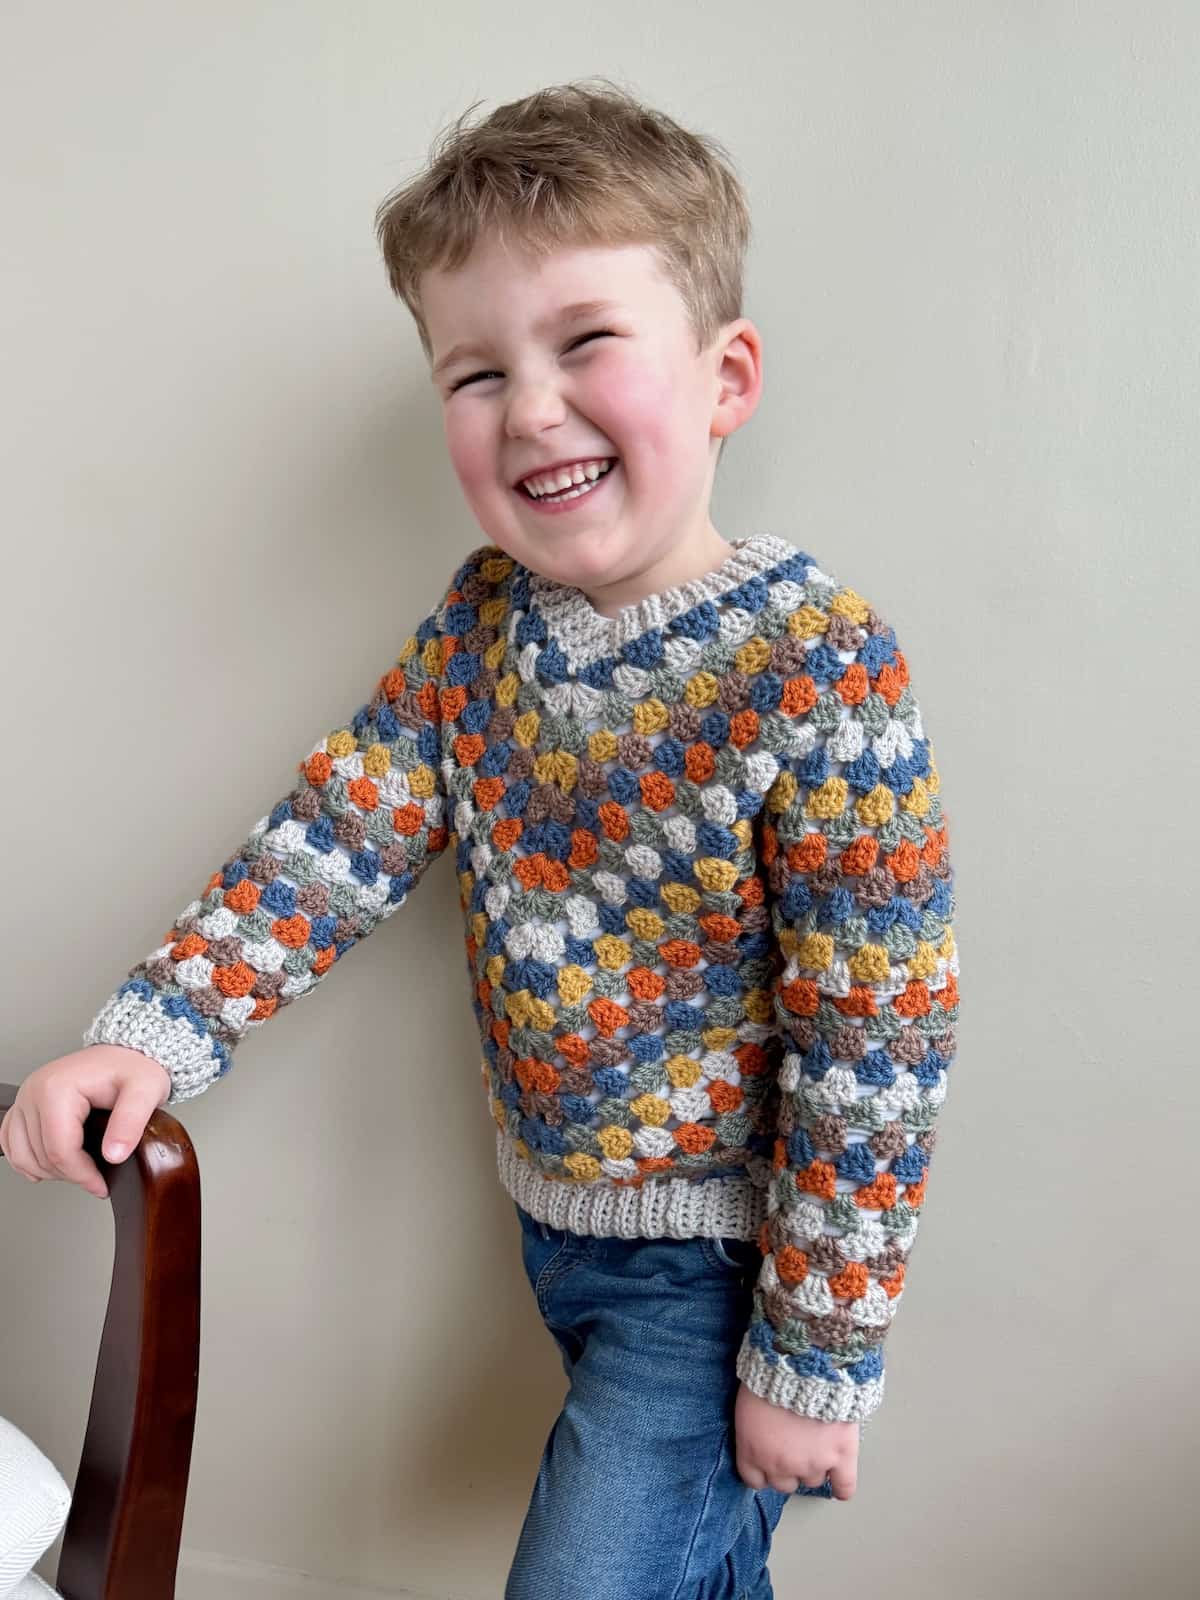 A child wearing a granny stitch sweater sits on a chair.